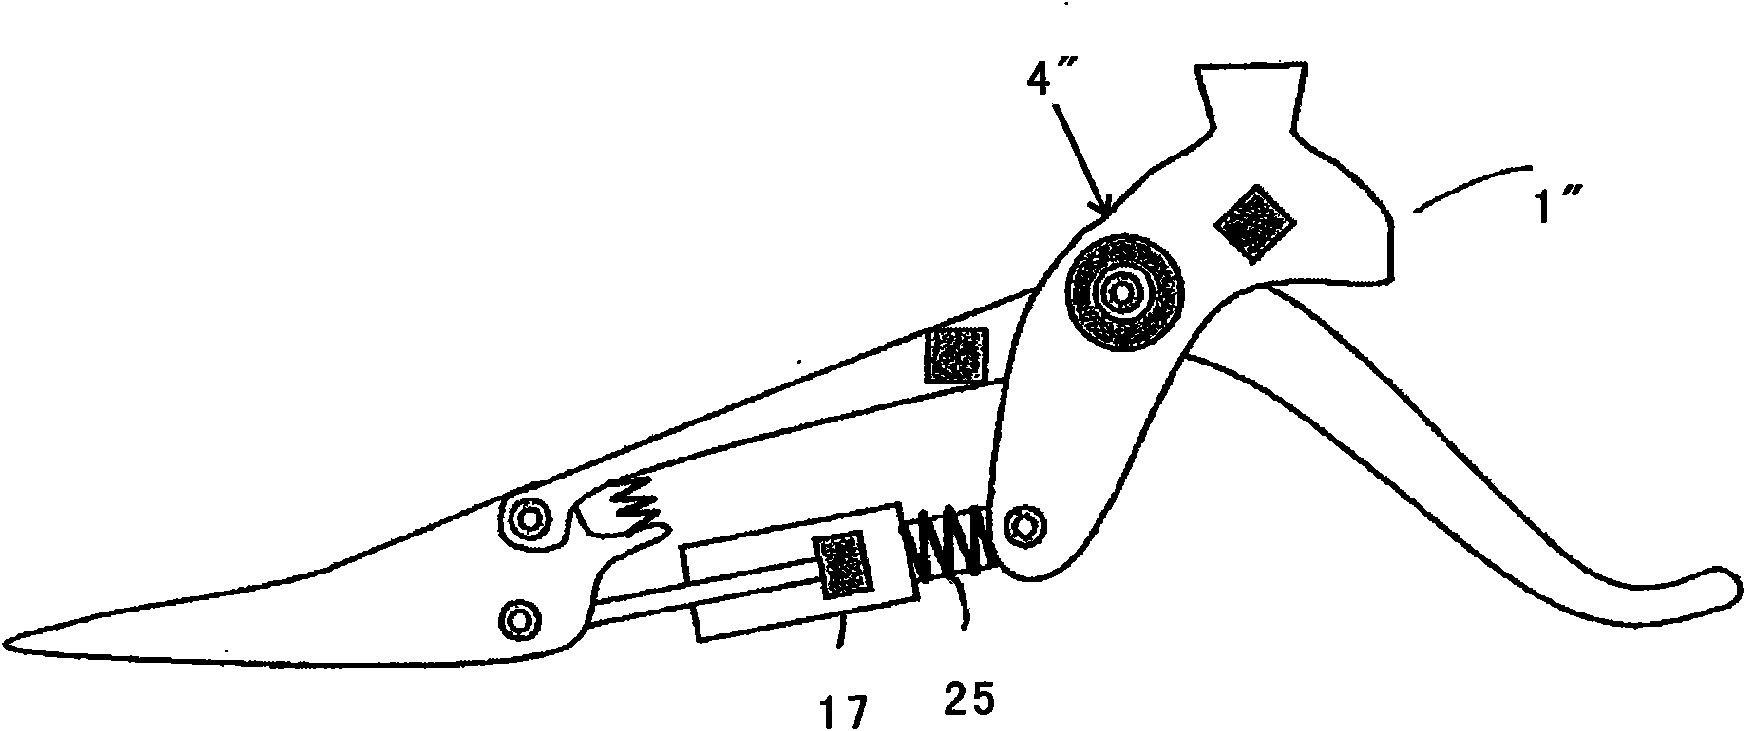 Orthopaedic foot component and method for controlling an artificial foot